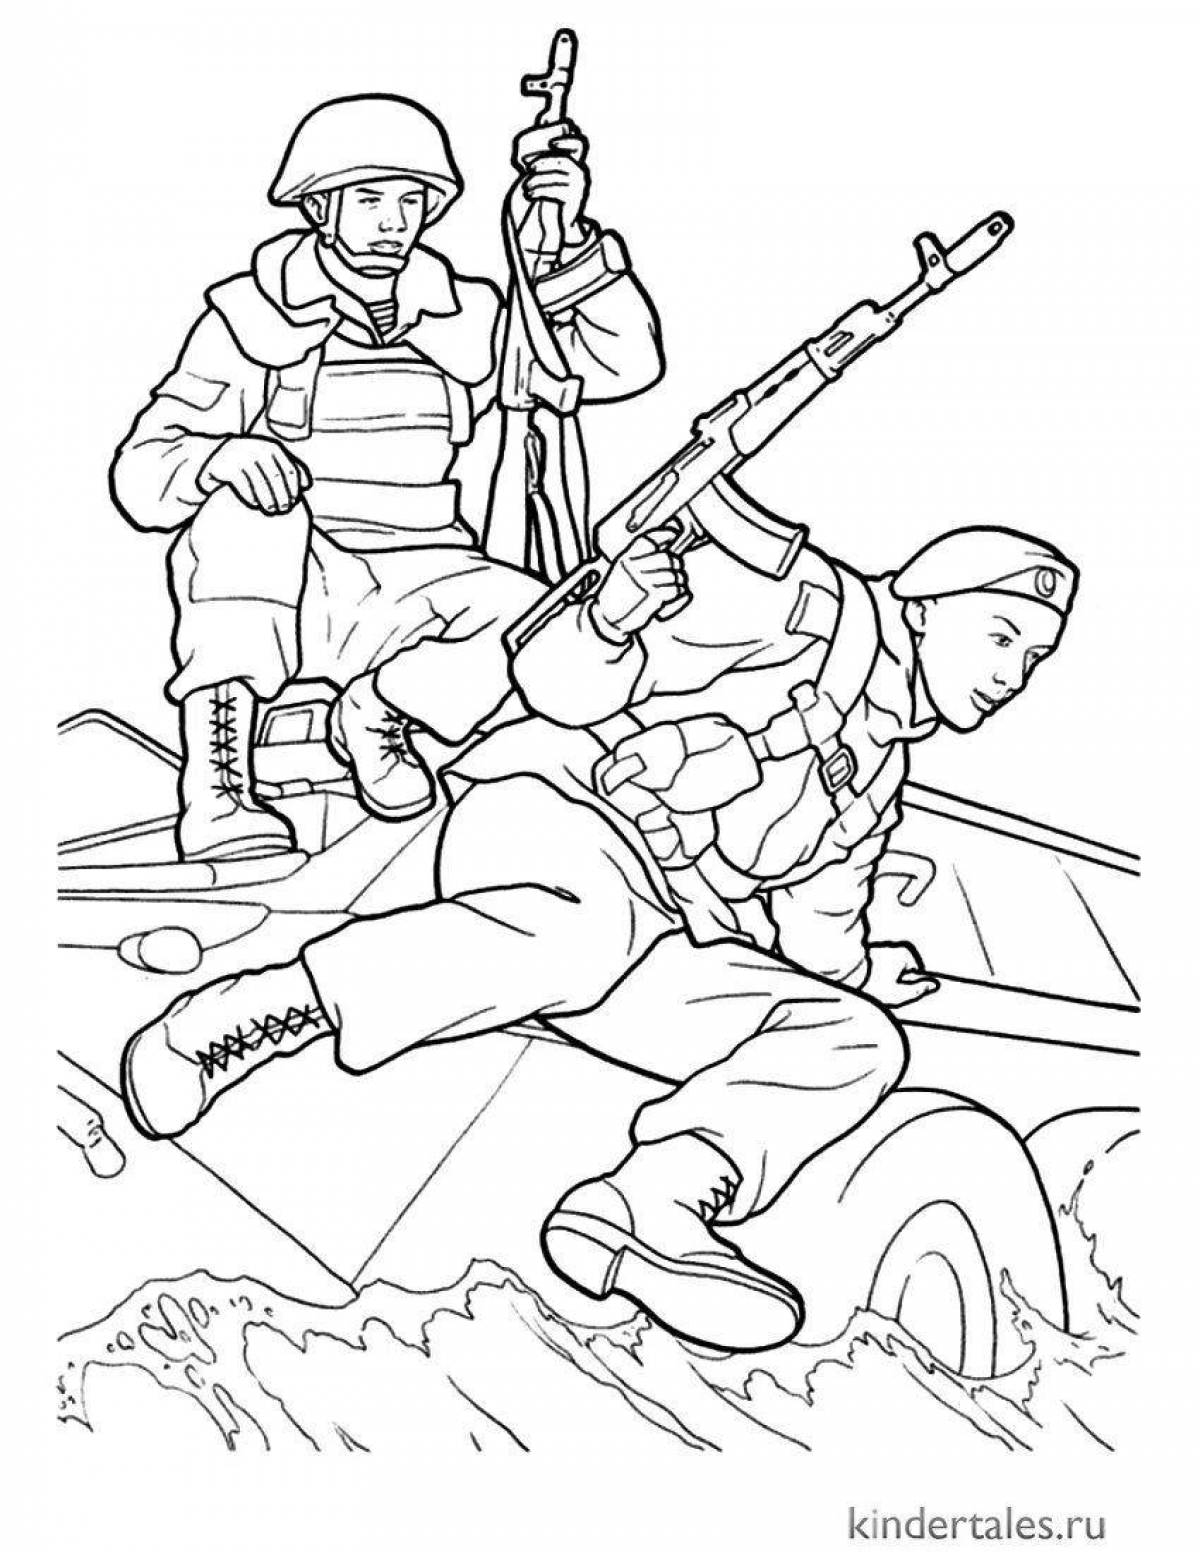 Exciting infantry coloring book for preschoolers